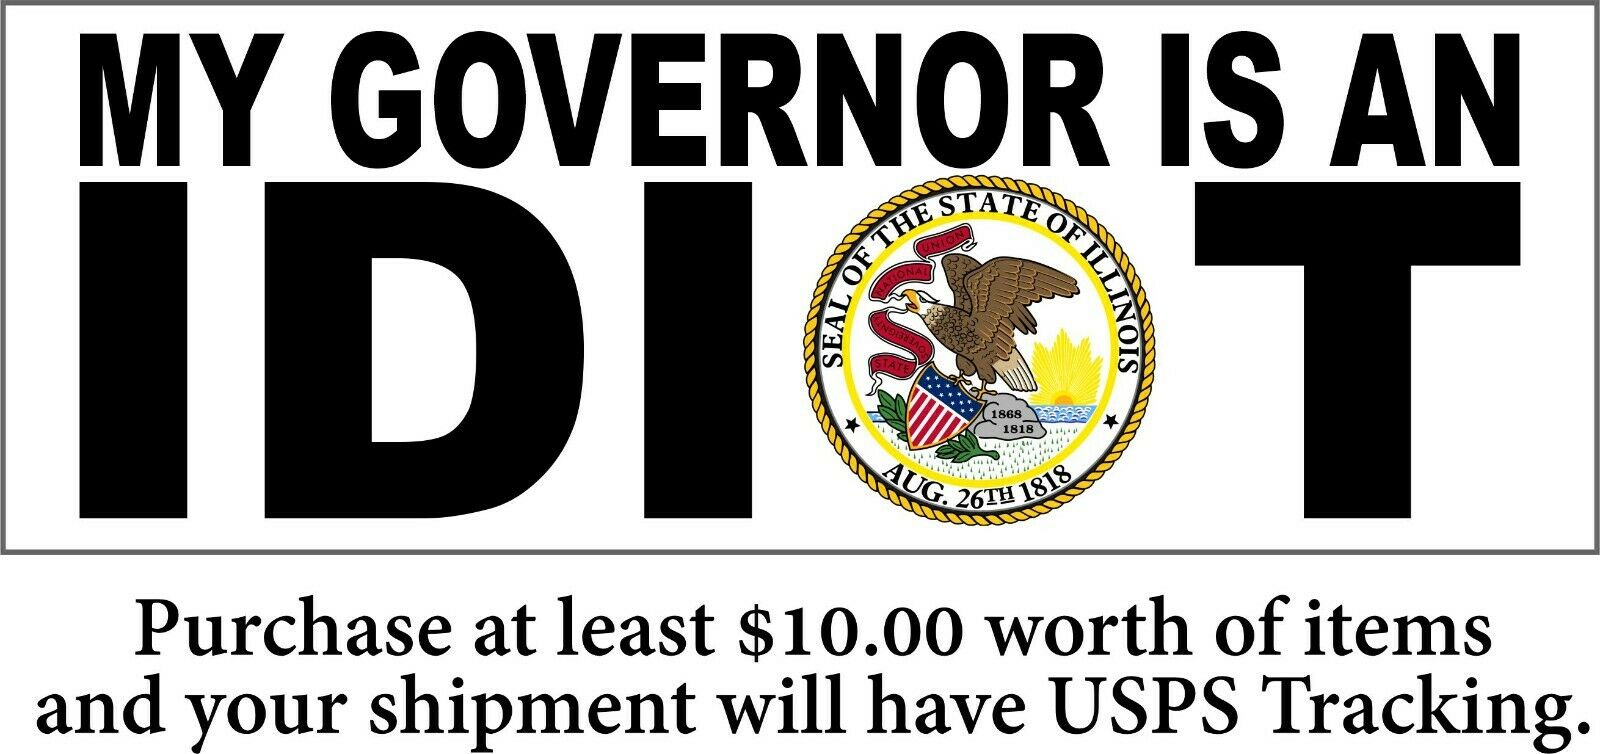 My governor is an idiot bumper sticker - STATE OF ILLINOIS - 8.6" x 3" STICKER - Powercall Sirens LLC